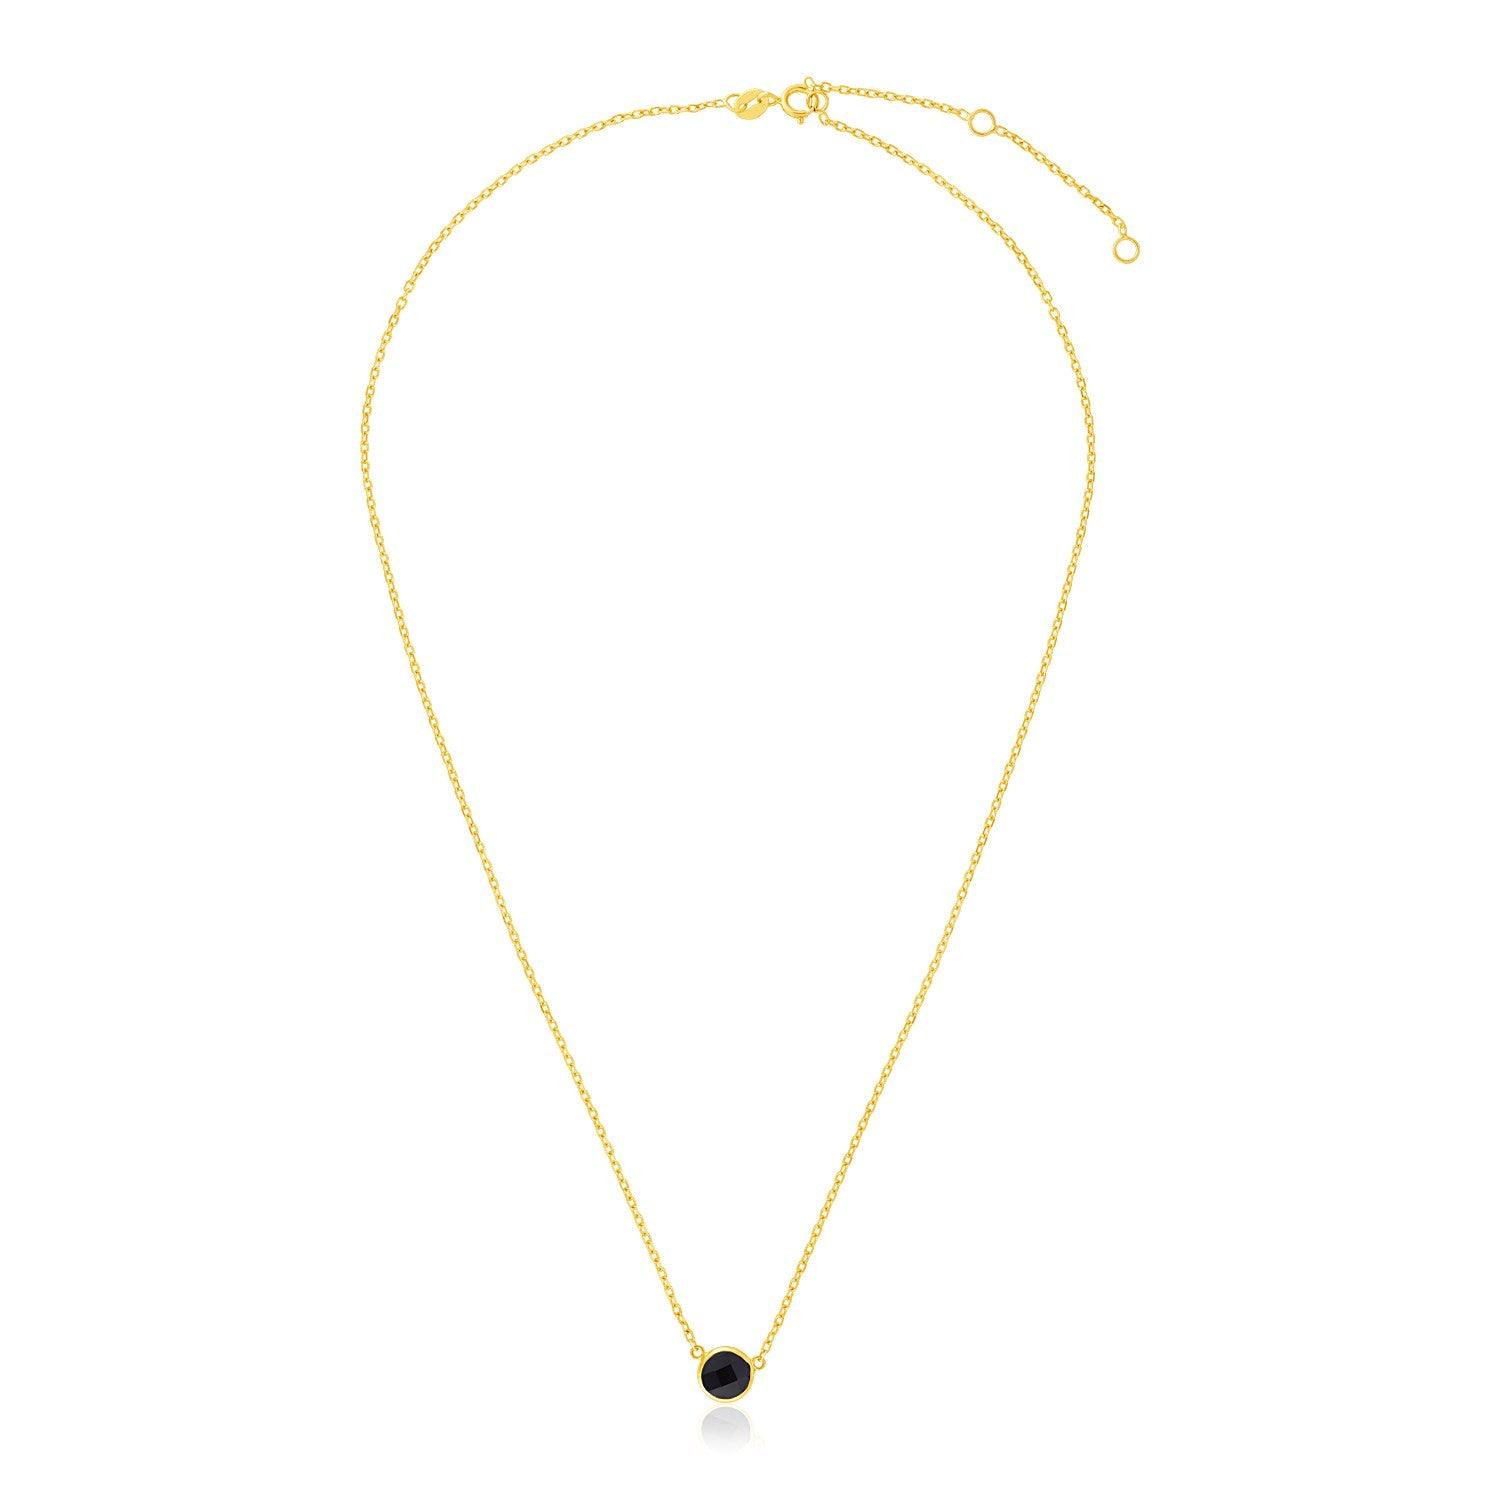 14k Yellow Gold 17 inch Necklace with Round Onyx freeshipping - Higher Class Elegance